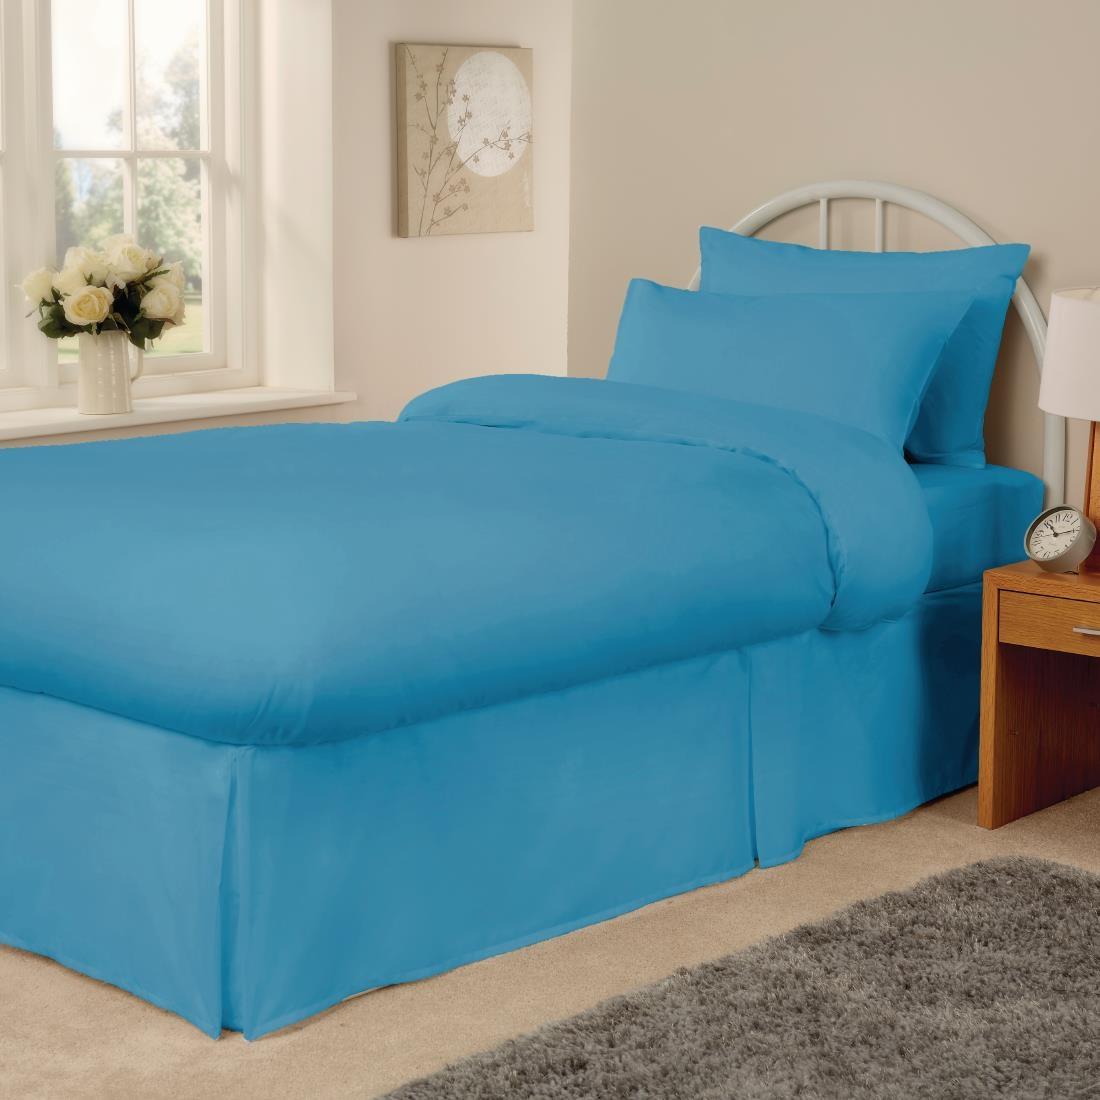 Mitre Essentials Spectrum Fitted Sheet Turquoise King - HB667  - 1